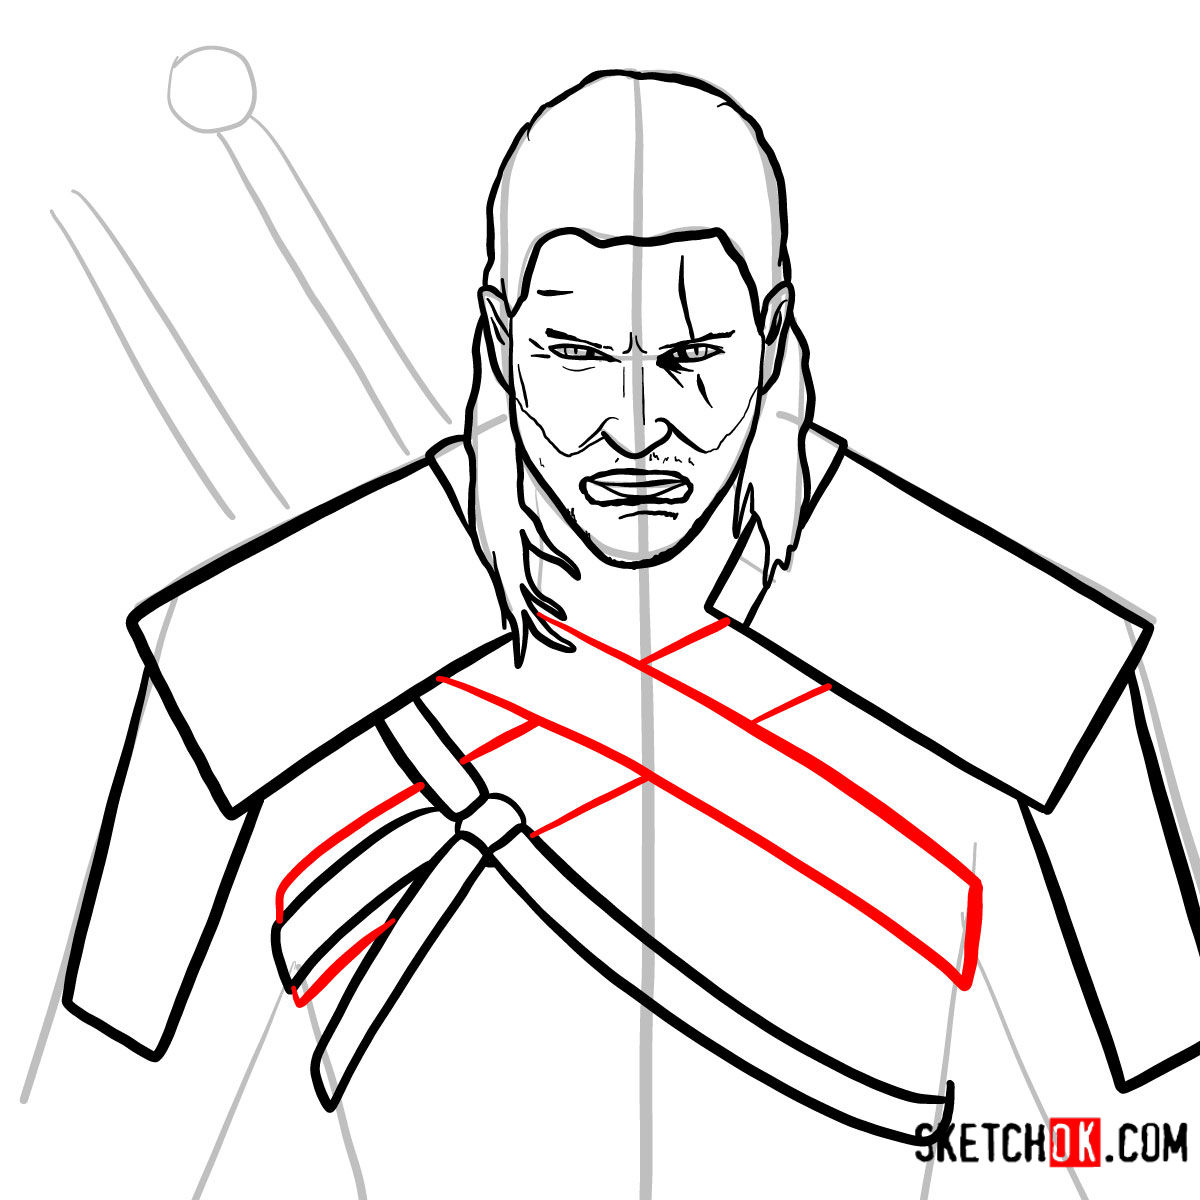 How to draw Geralt of Rivia | The Witcher - step 12